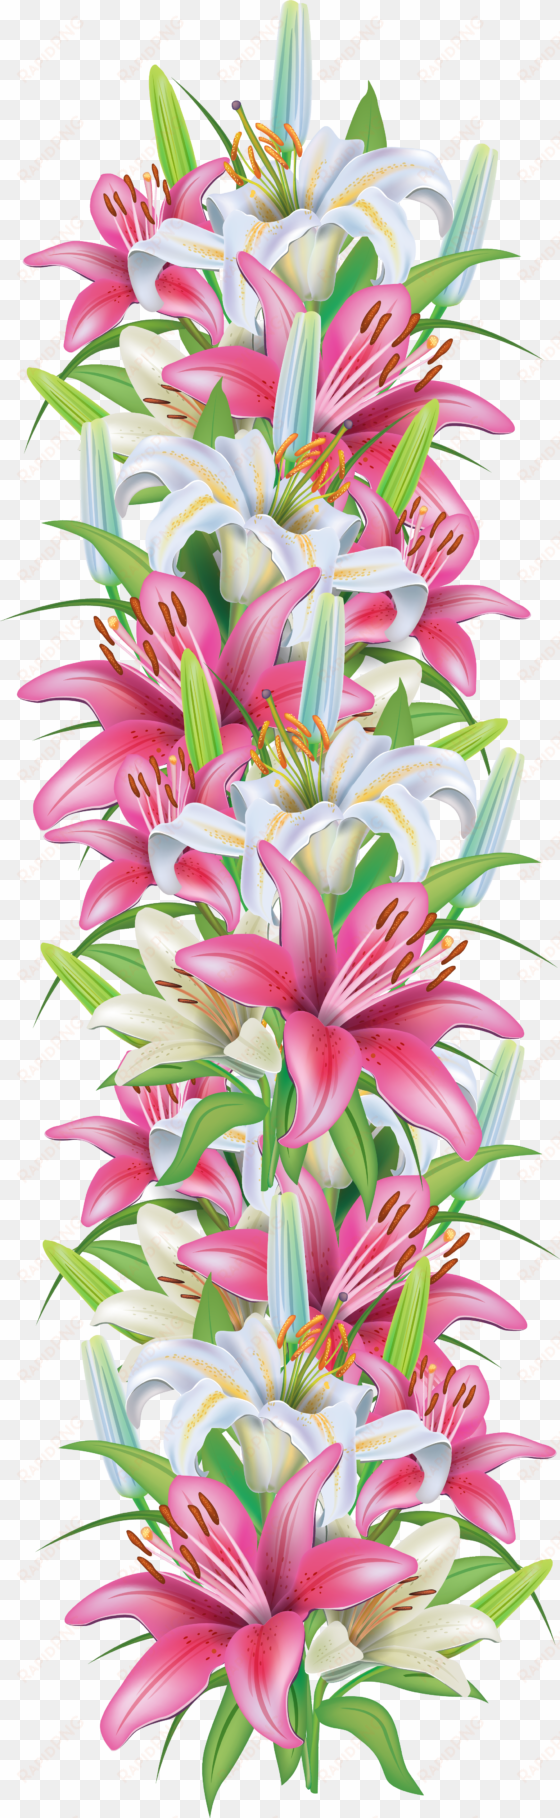 pink and white lilies decoration border png clipart - lily flower border png